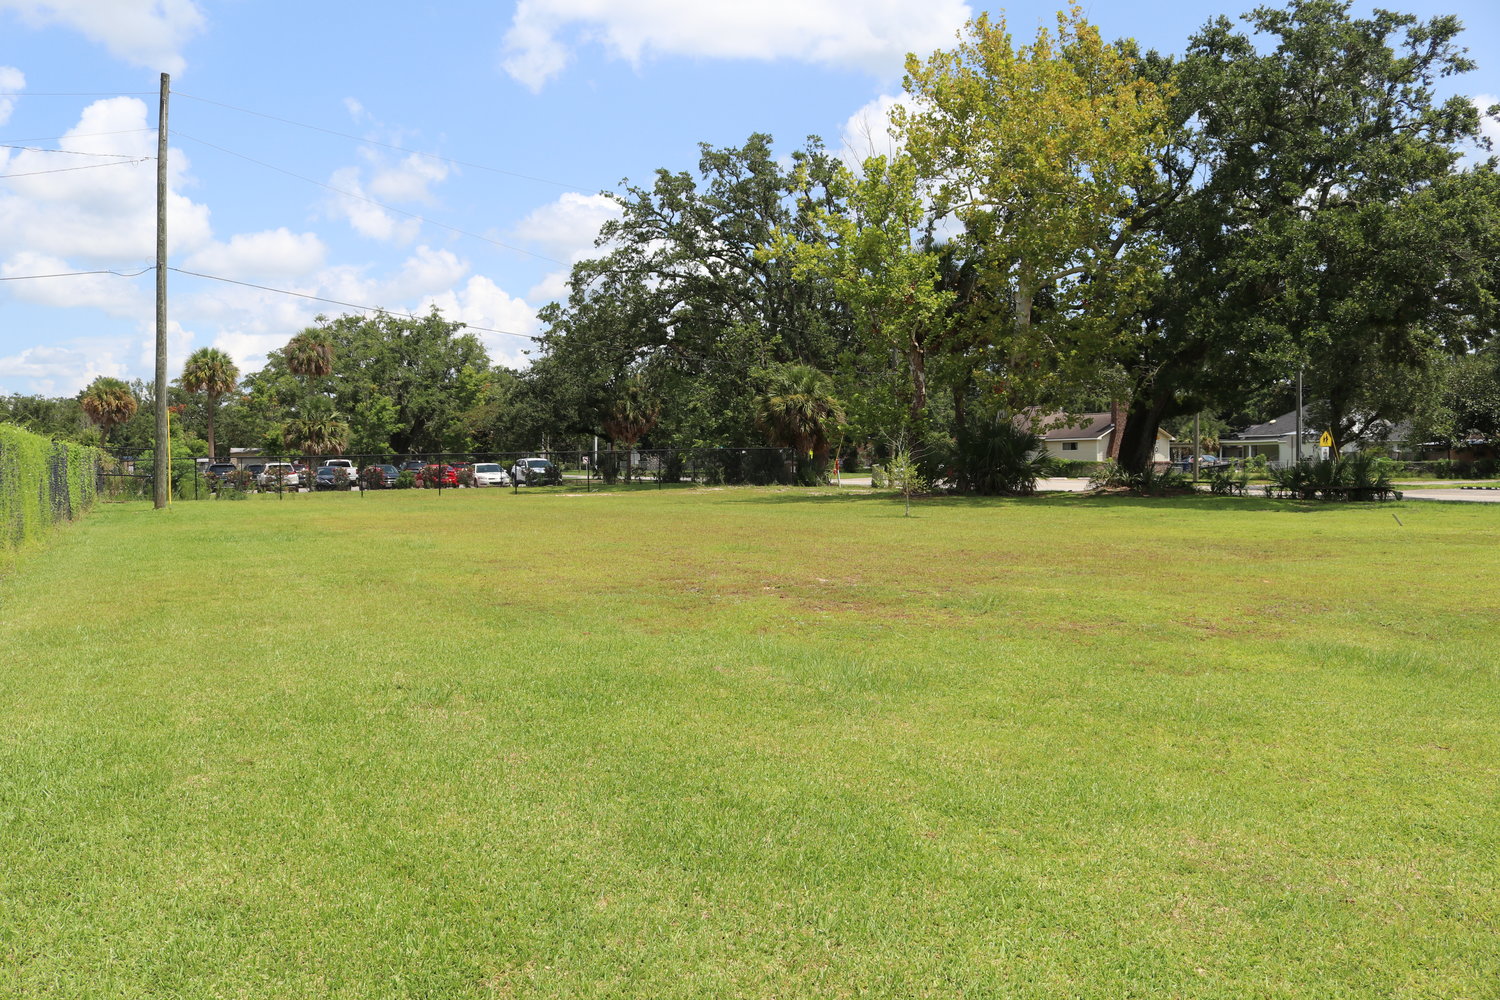 Potential future home of a new pocket park in Foley. The park would include an amphitheater and permanent musical instruments, and could be used for scheduled performances and musical outings.